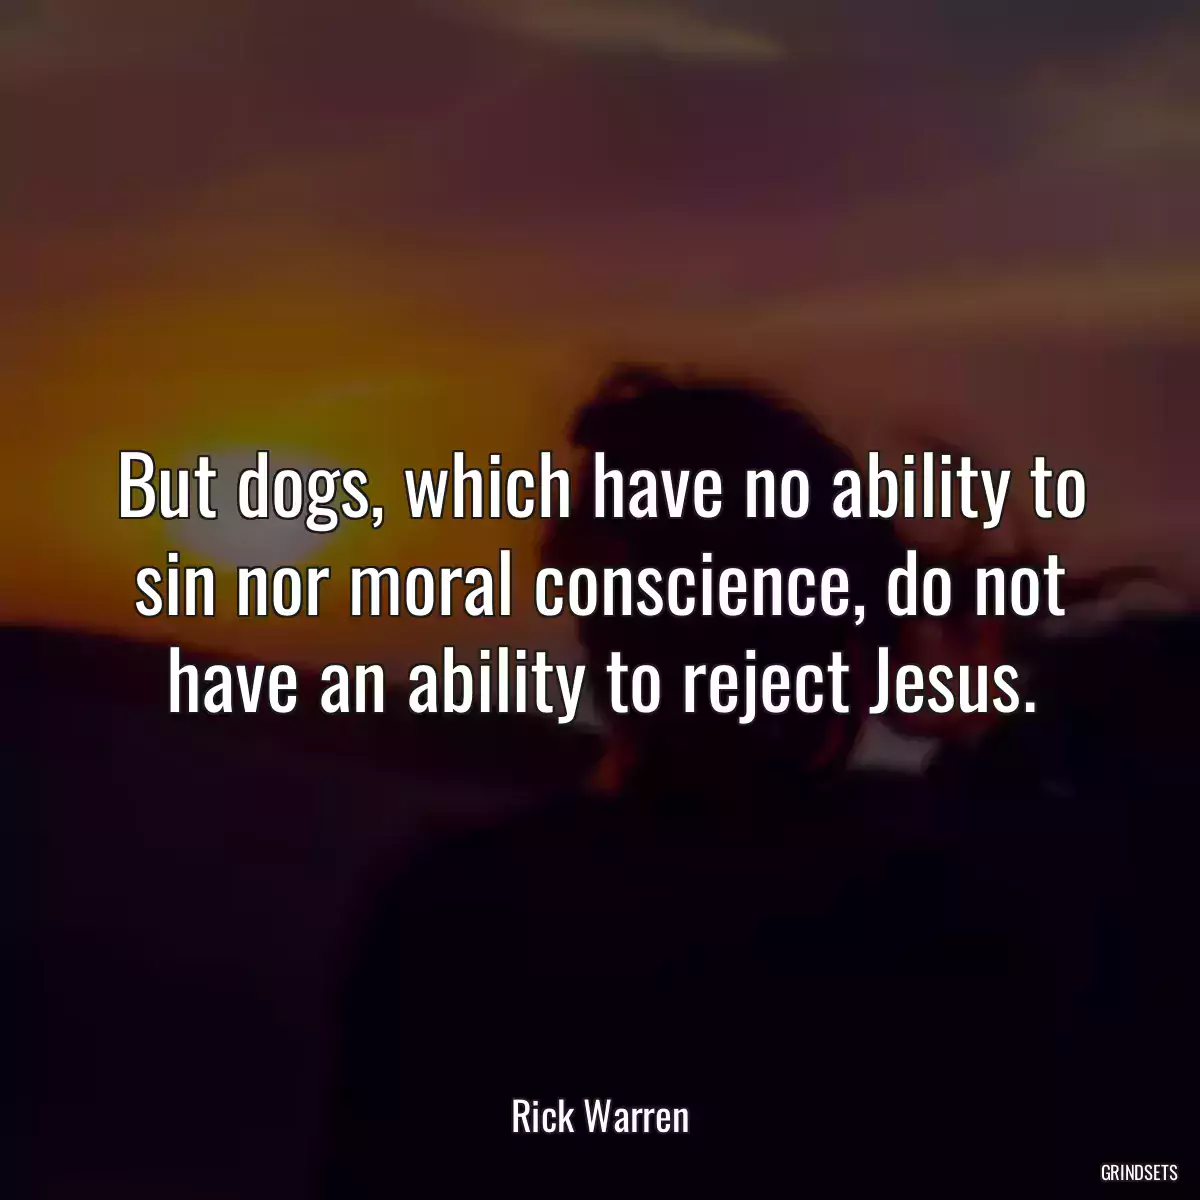 But dogs, which have no ability to sin nor moral conscience, do not have an ability to reject Jesus.